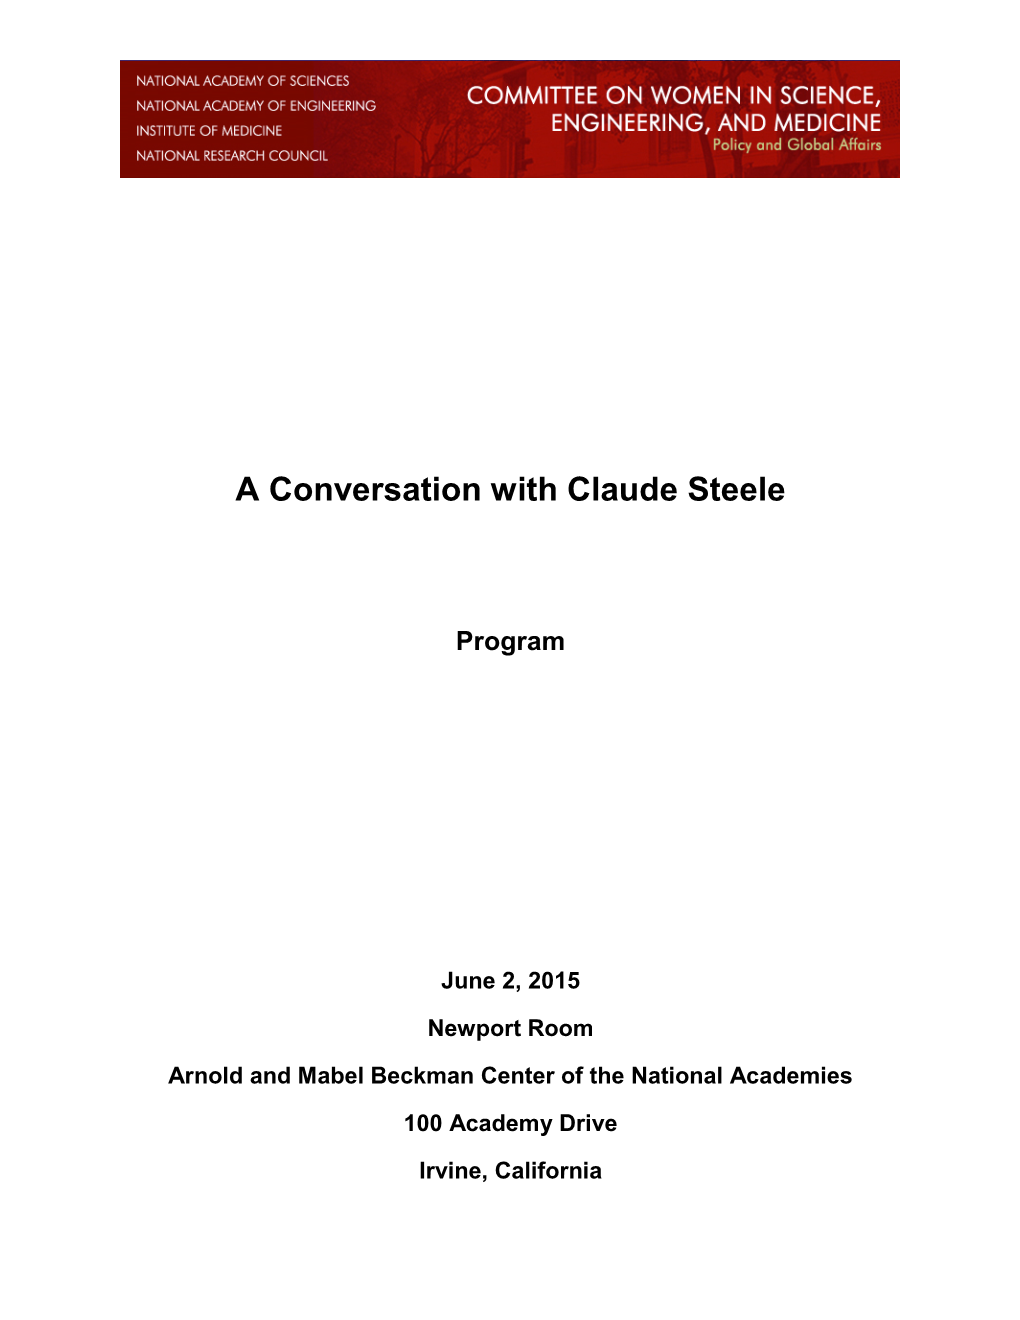 A Conversation with Claude Steele